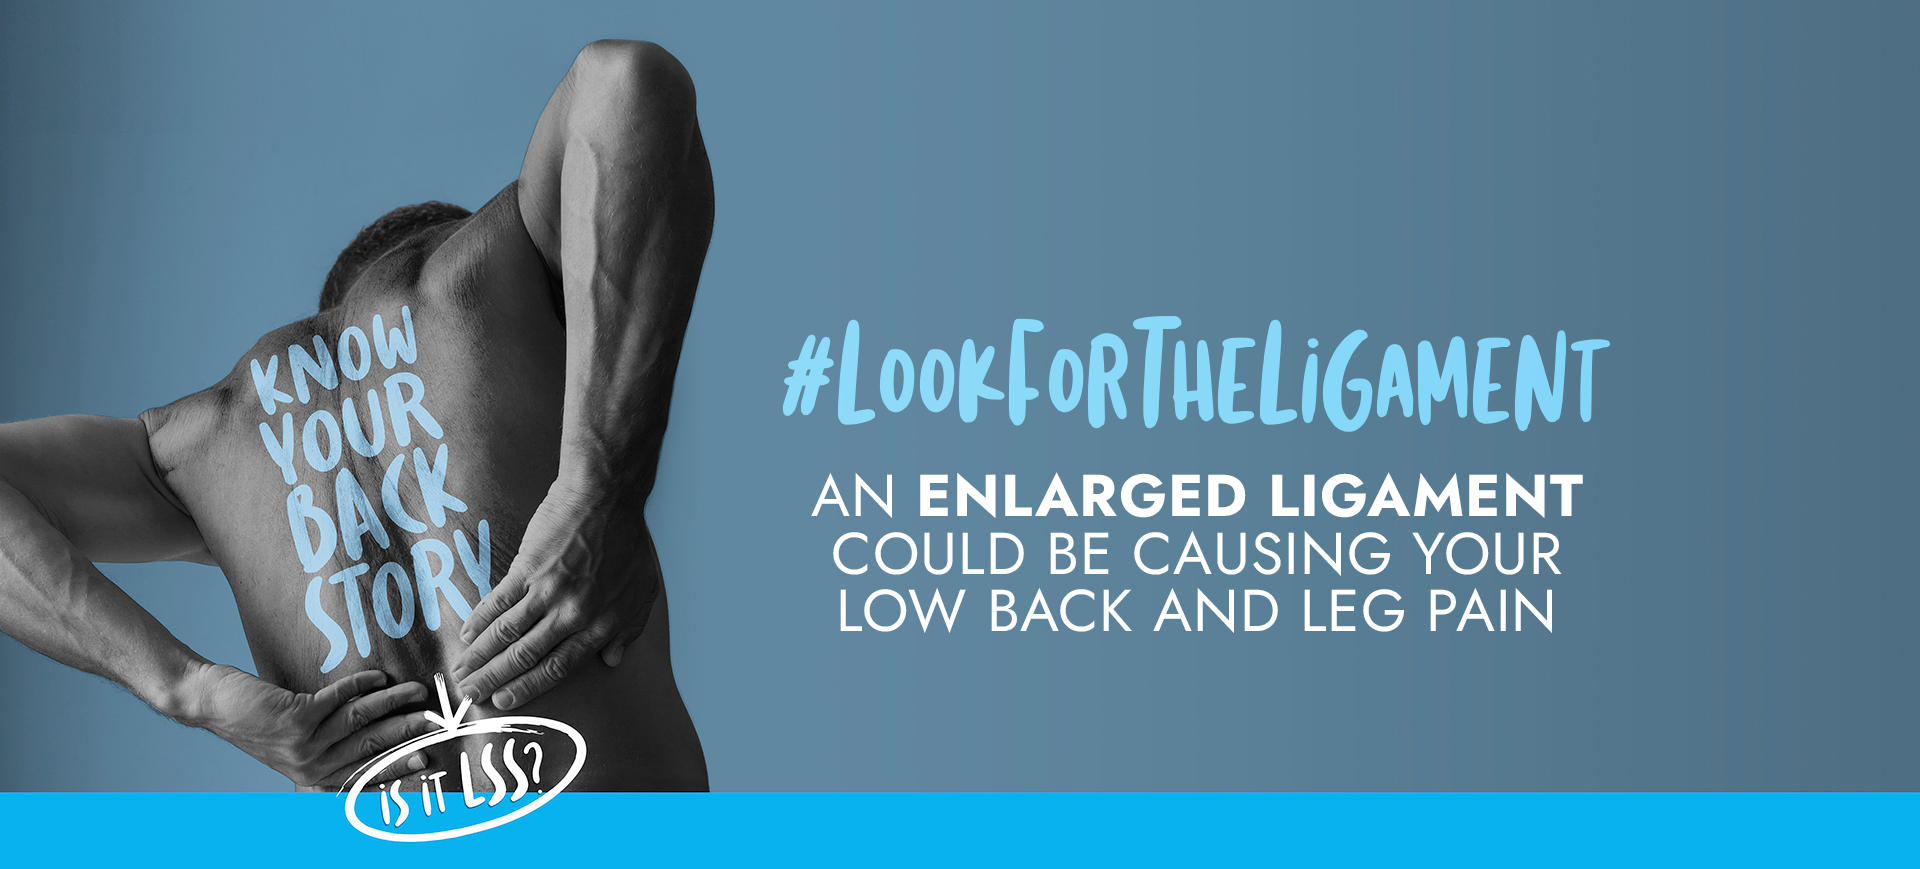 Image: Man with his back shown. Text: Know Your Back Story, Is it LSS? #LookForTheLigament. An enlarged ligament could be causing your low back and leg pain.